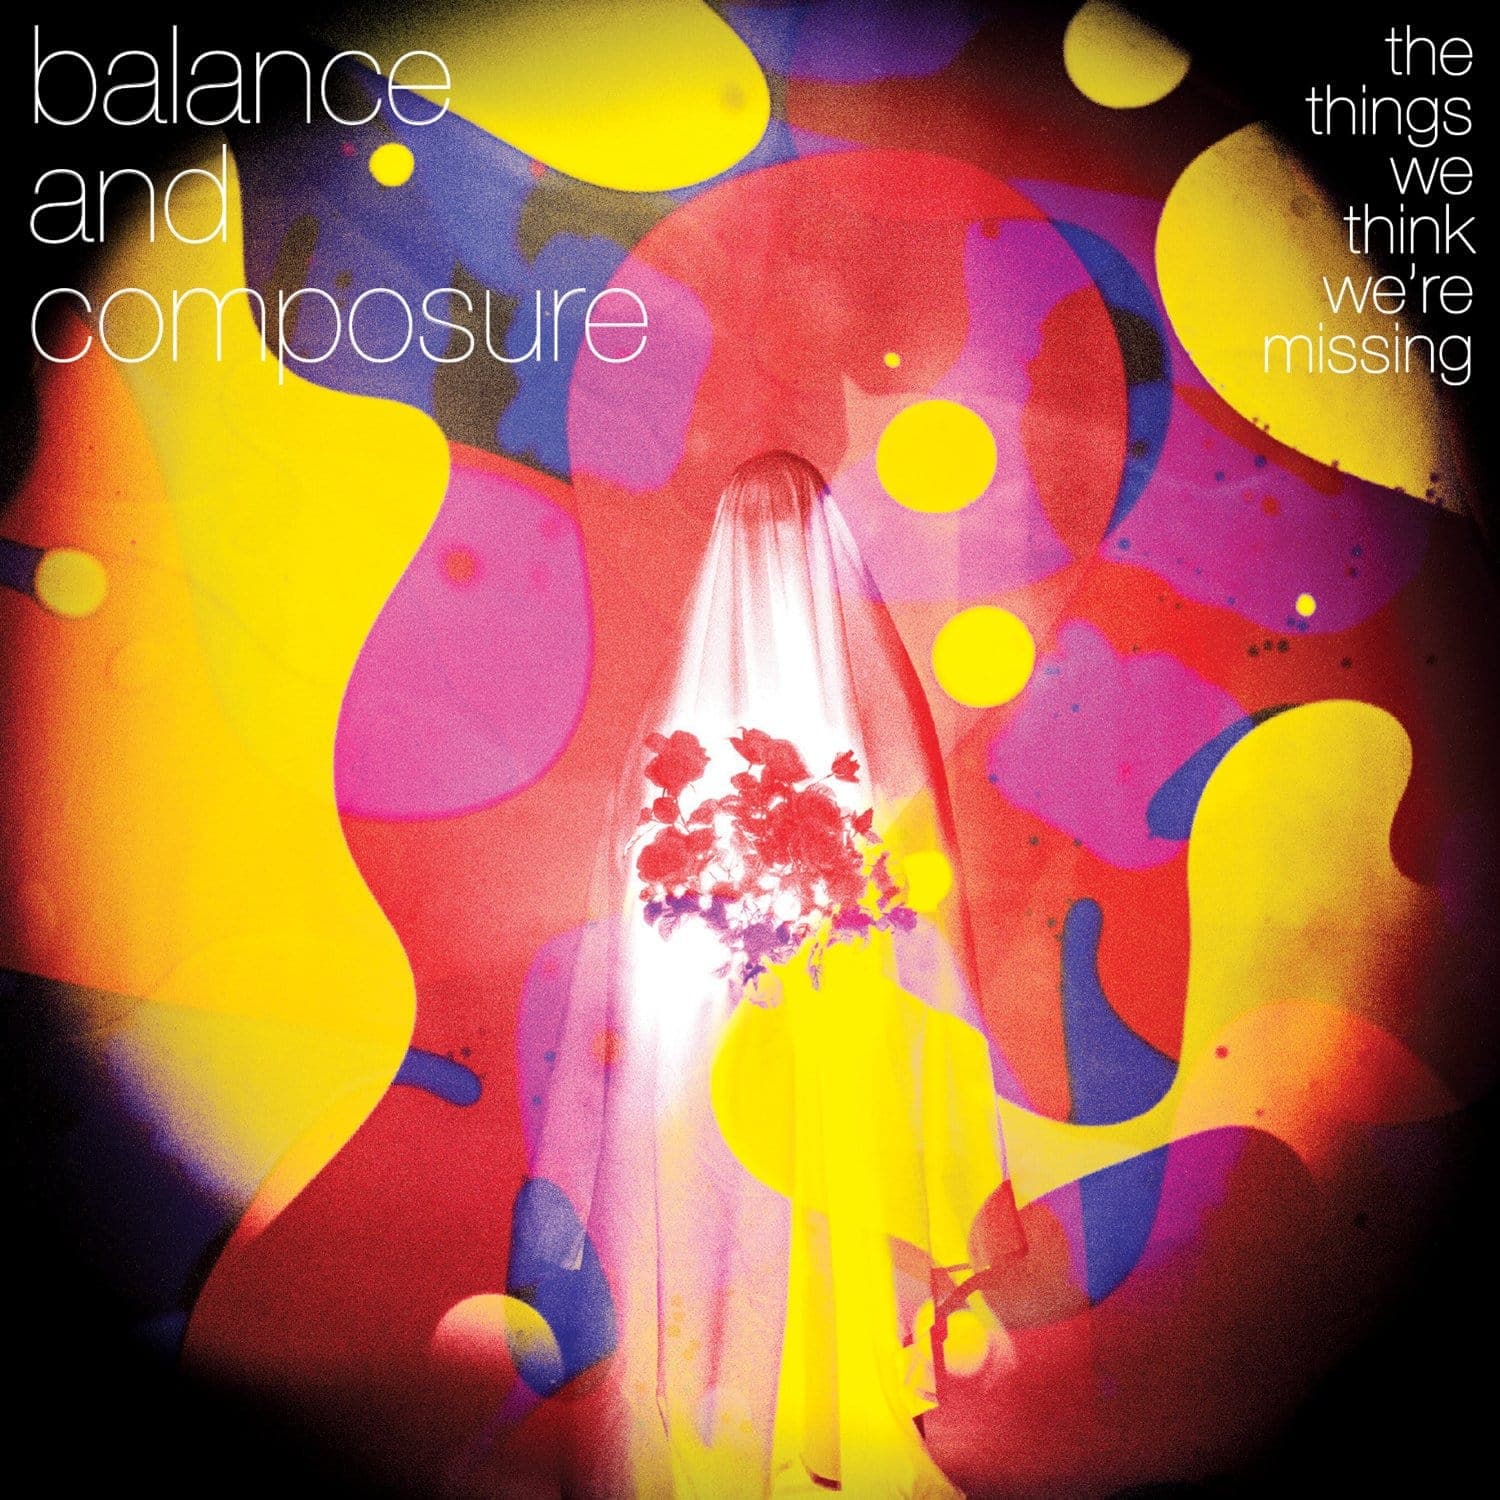 The Things We Think We're Missing - NO SLEEP RECORDS - Balance and Composure